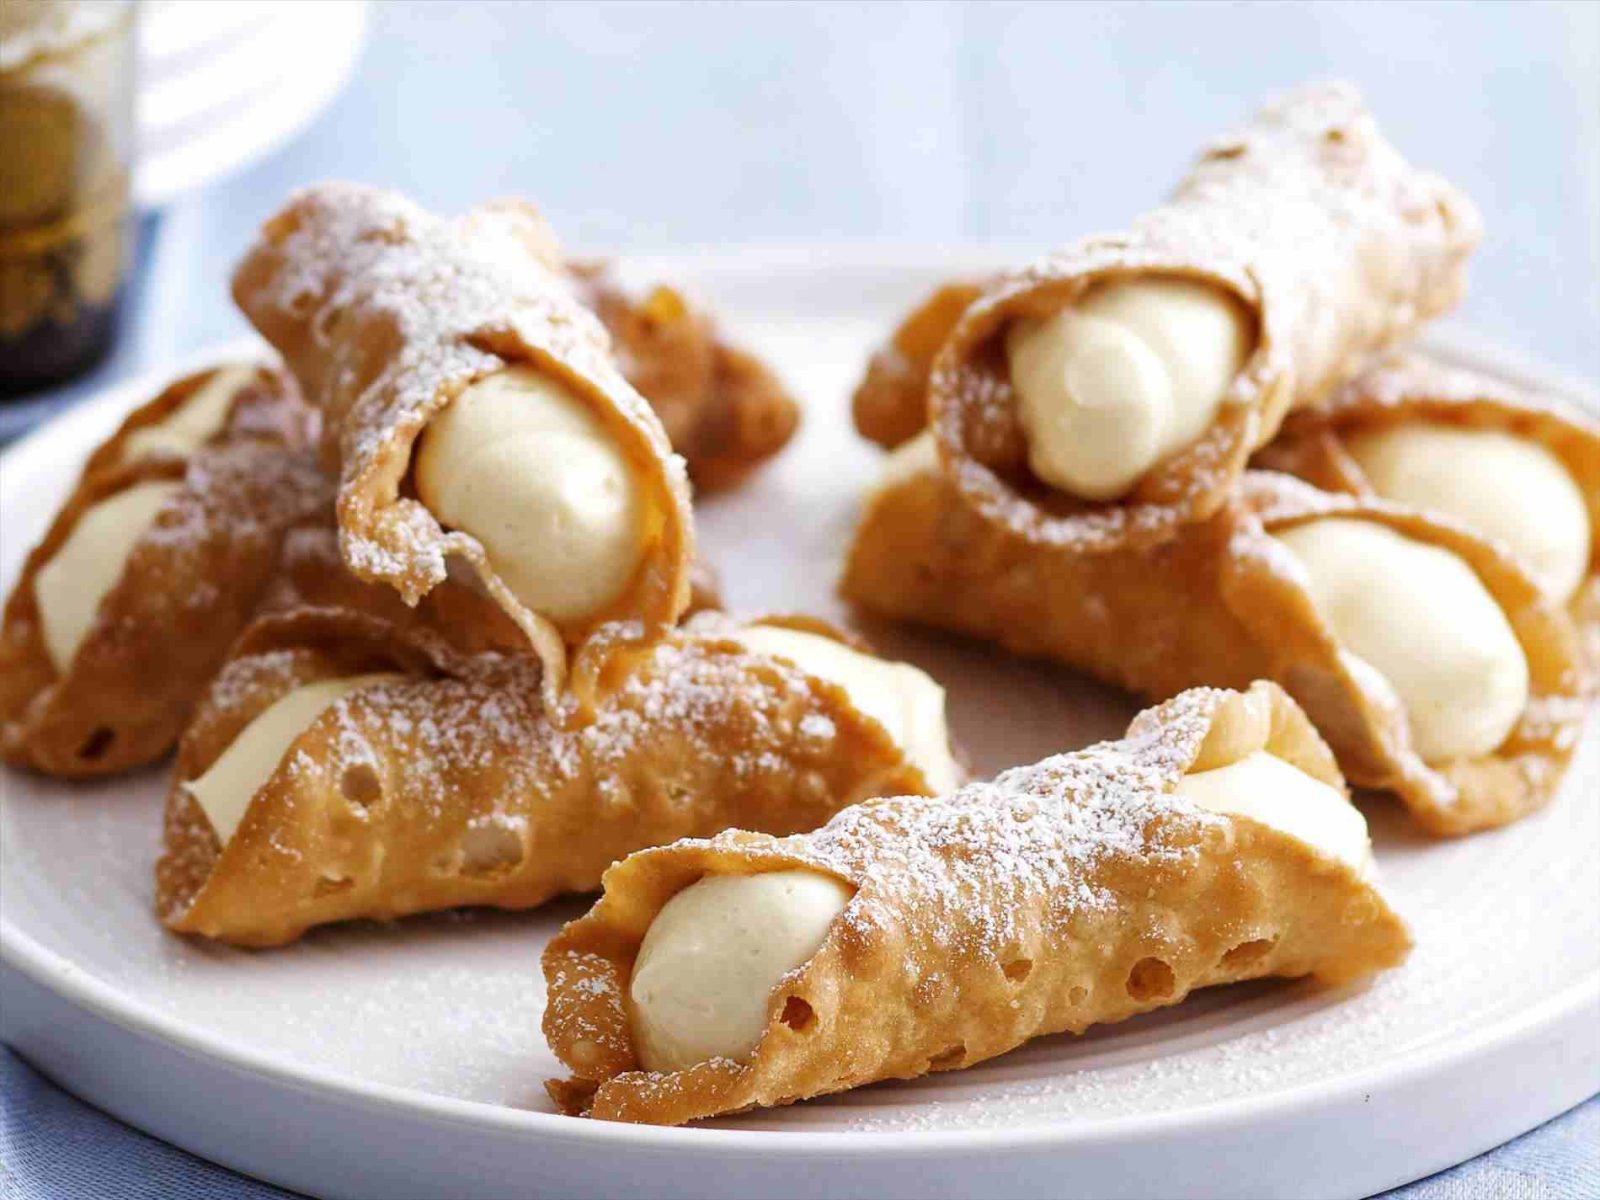 🥐 Can We Guess Your Age and Gender Based on the Pastries You’ve Eaten? Cannoli